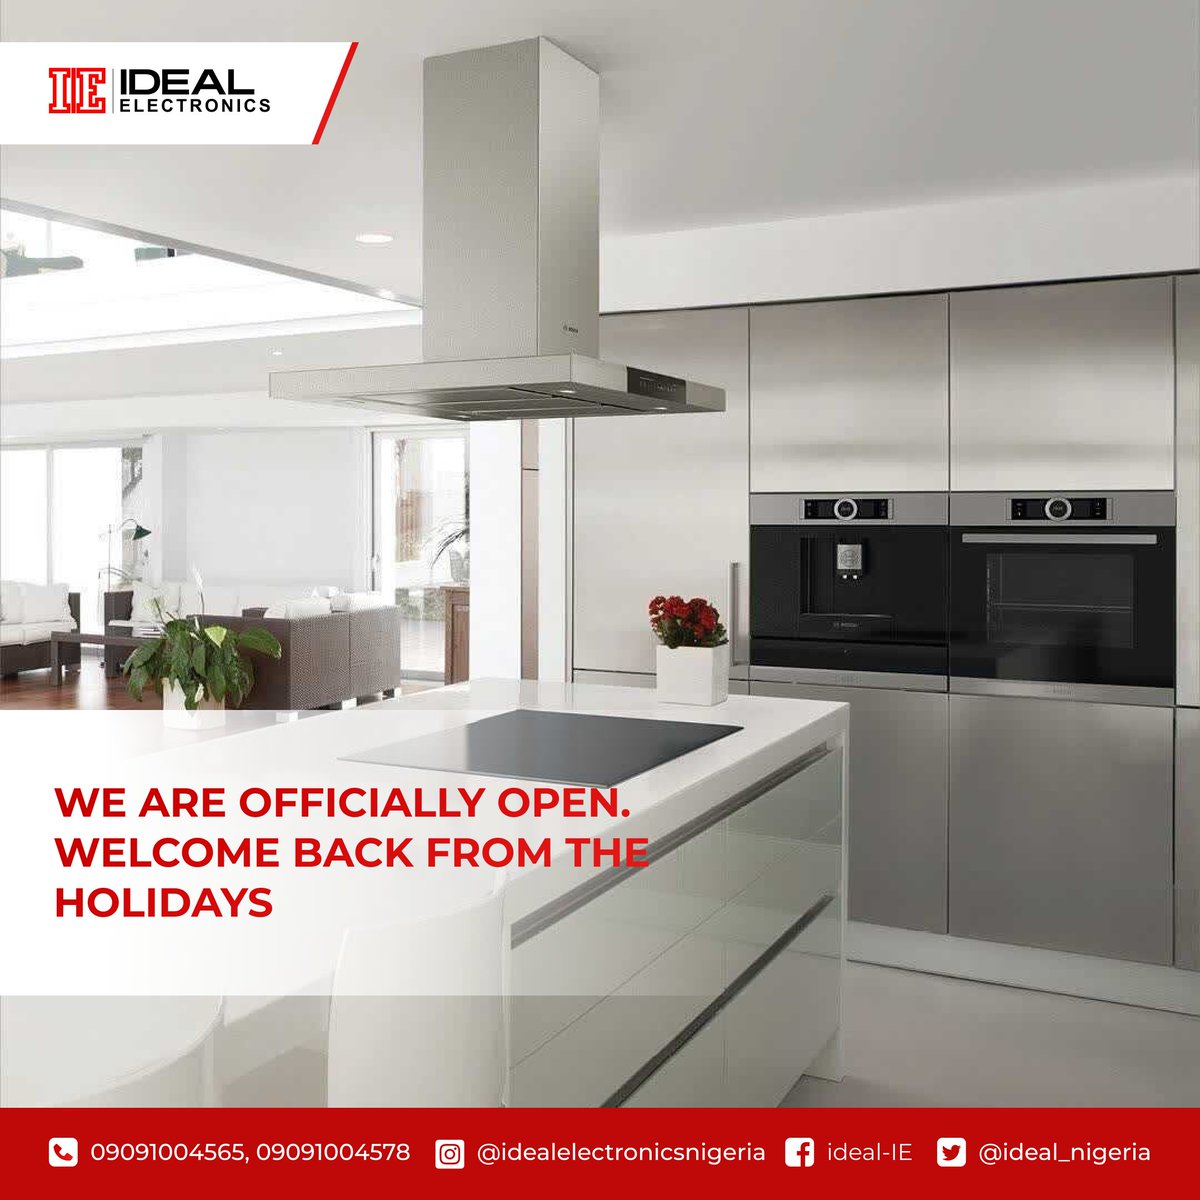 Great news 🎊🎉🥳

We are officially open for the new year.

Happy new year once again and welcome back from the holidays.

#Newyear #idealelectronics
#boschhome #ventilation #thermal #powertools #luxurykitchens #luxurylifestyle #interiordesign #kitchendesign  #integratedkitchen